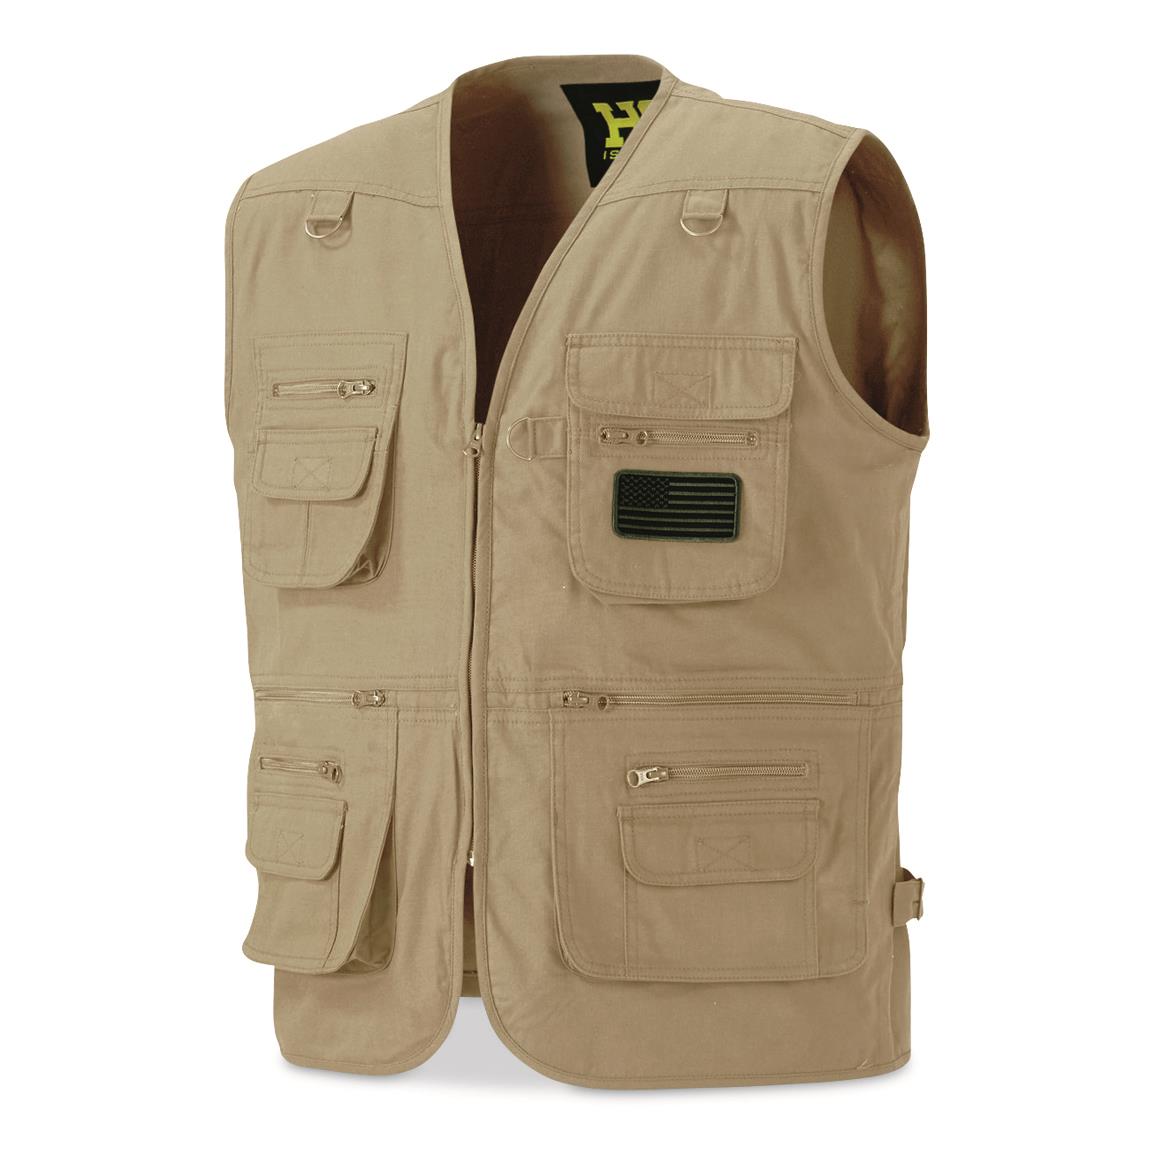 HQ ISSUE Men's Concealment Vest - 697340, Tactical Clothing at ...